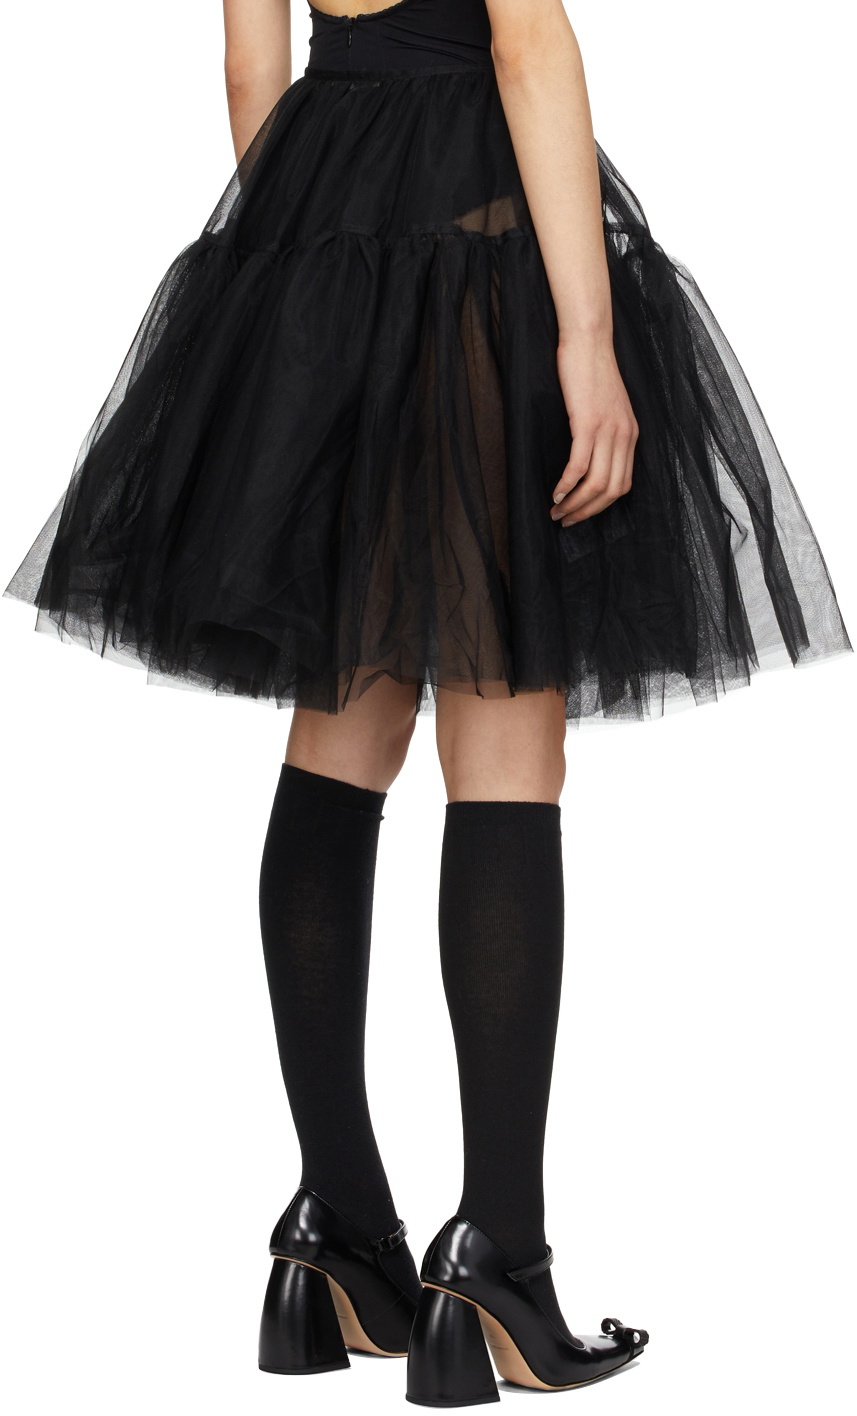 Black Tulle Skirt for Women Knee Length With Lining -  Canada